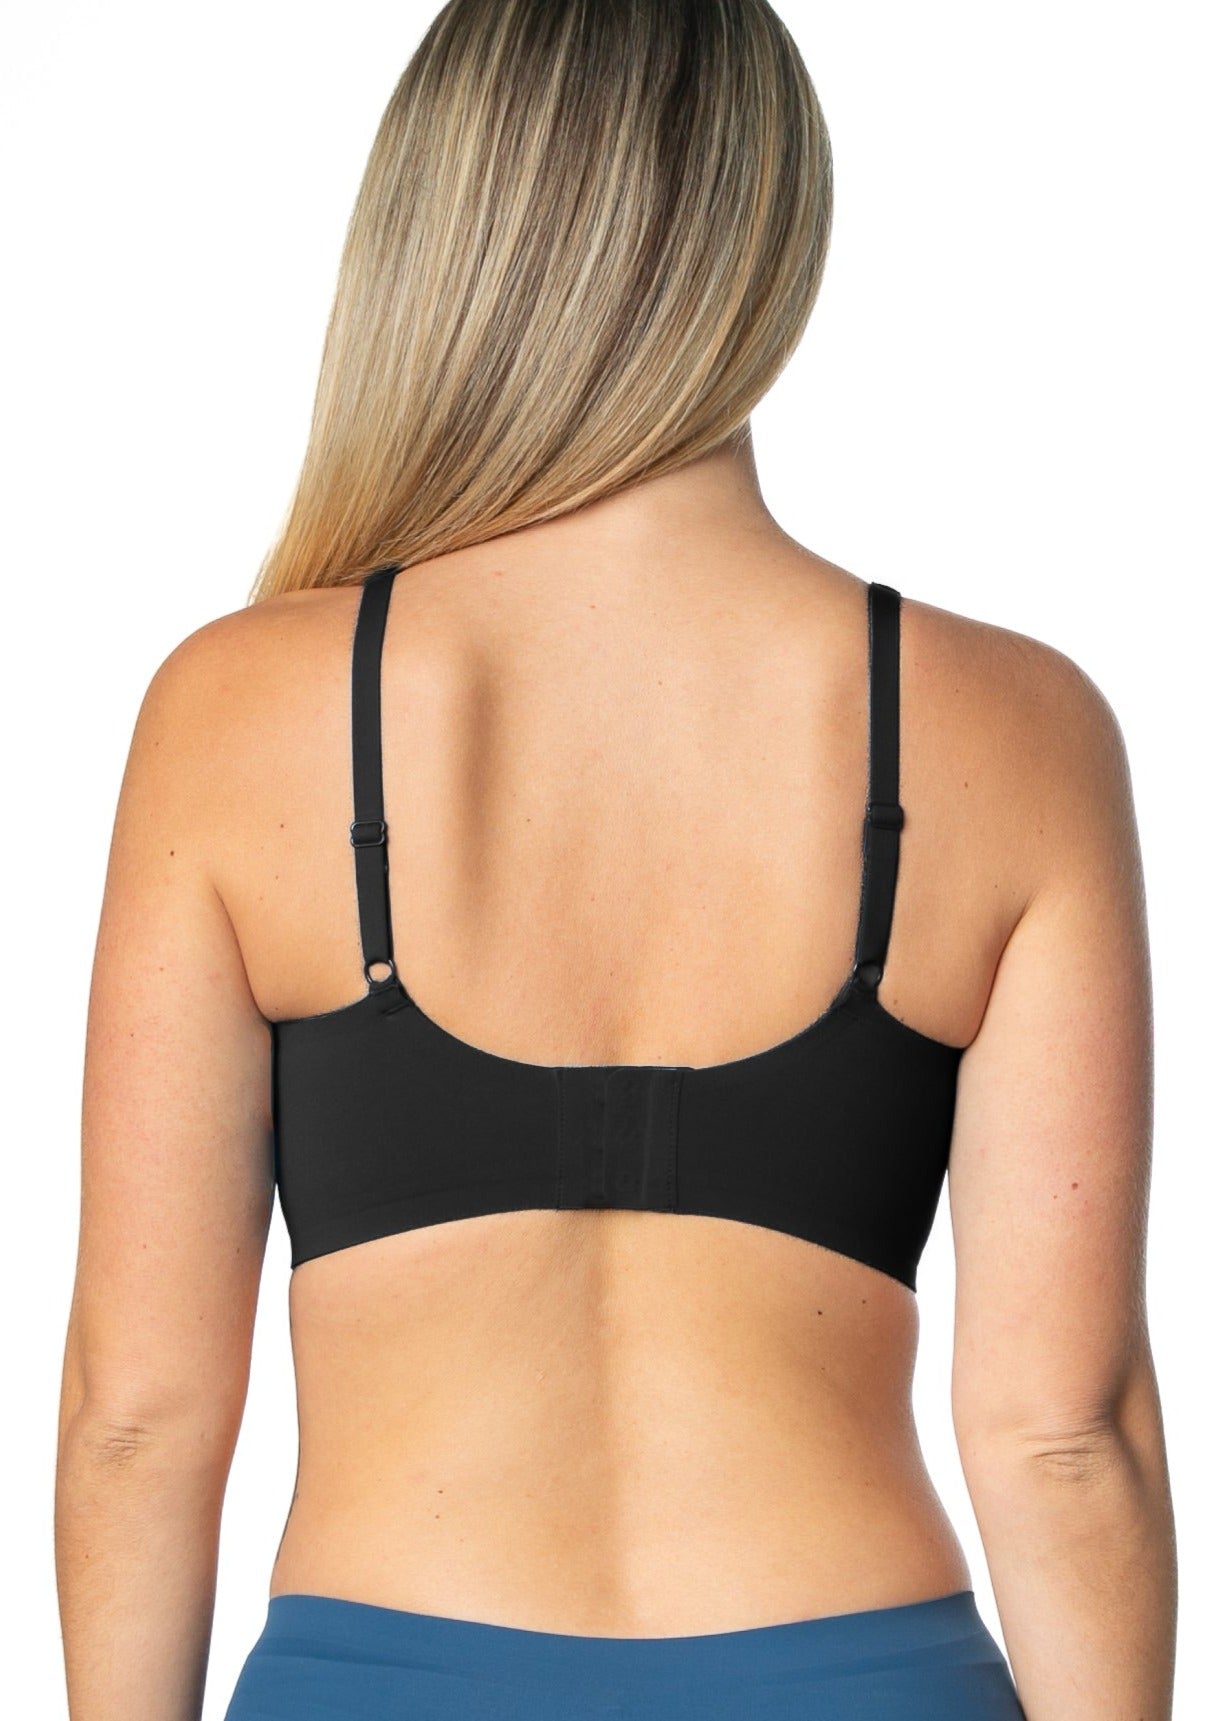 What Type of Bra is Best For Back Pain? – Rhonda Shear